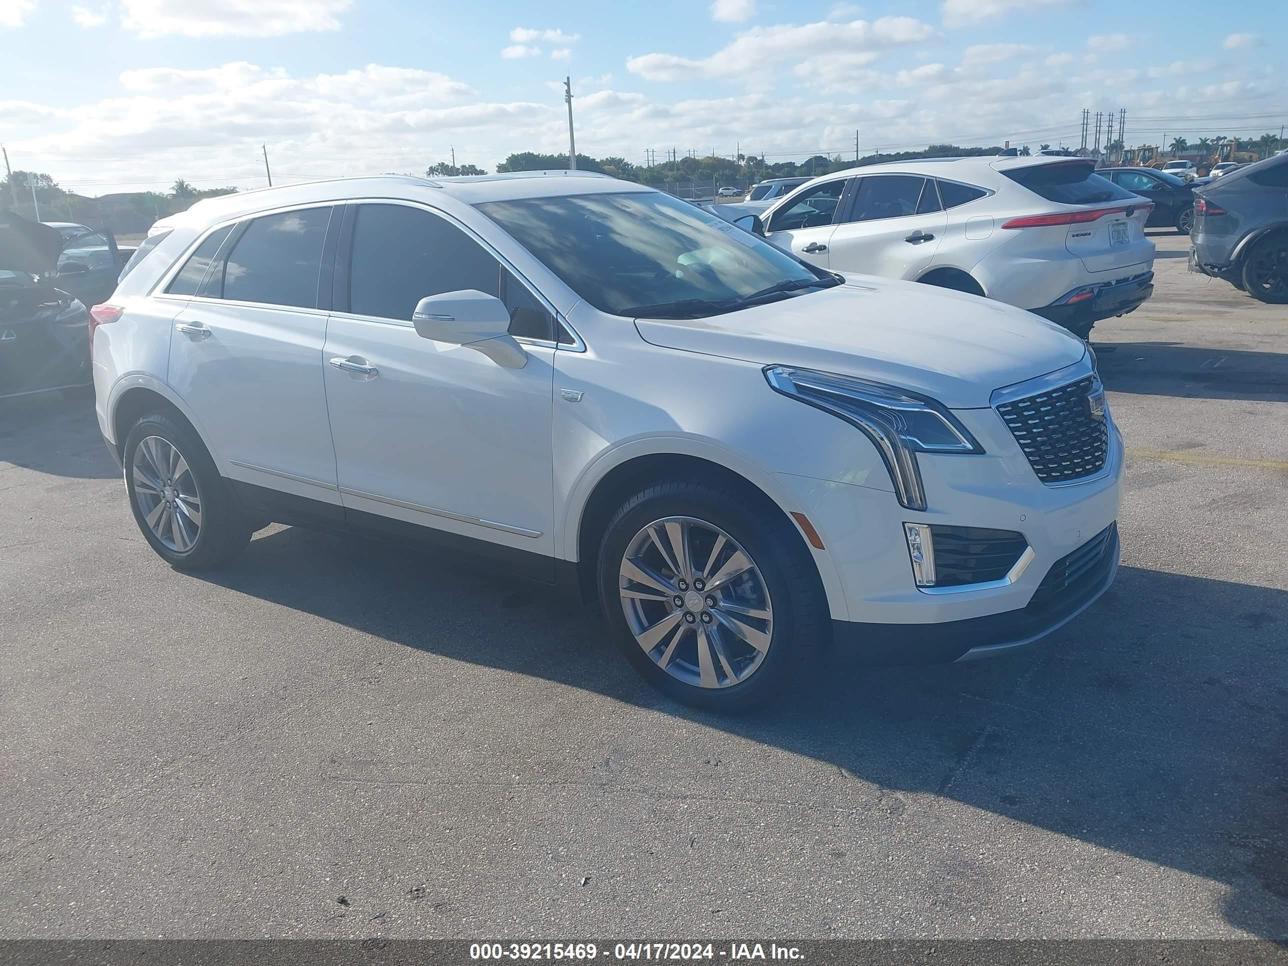 vin: 1GYKNCRS6RZ716694 1GYKNCRS6RZ716694 2024 cadillac xt5 3600 for Sale in 33332, 6275 Sw 196Th Ave, Pembroke Pines, Florida, USA